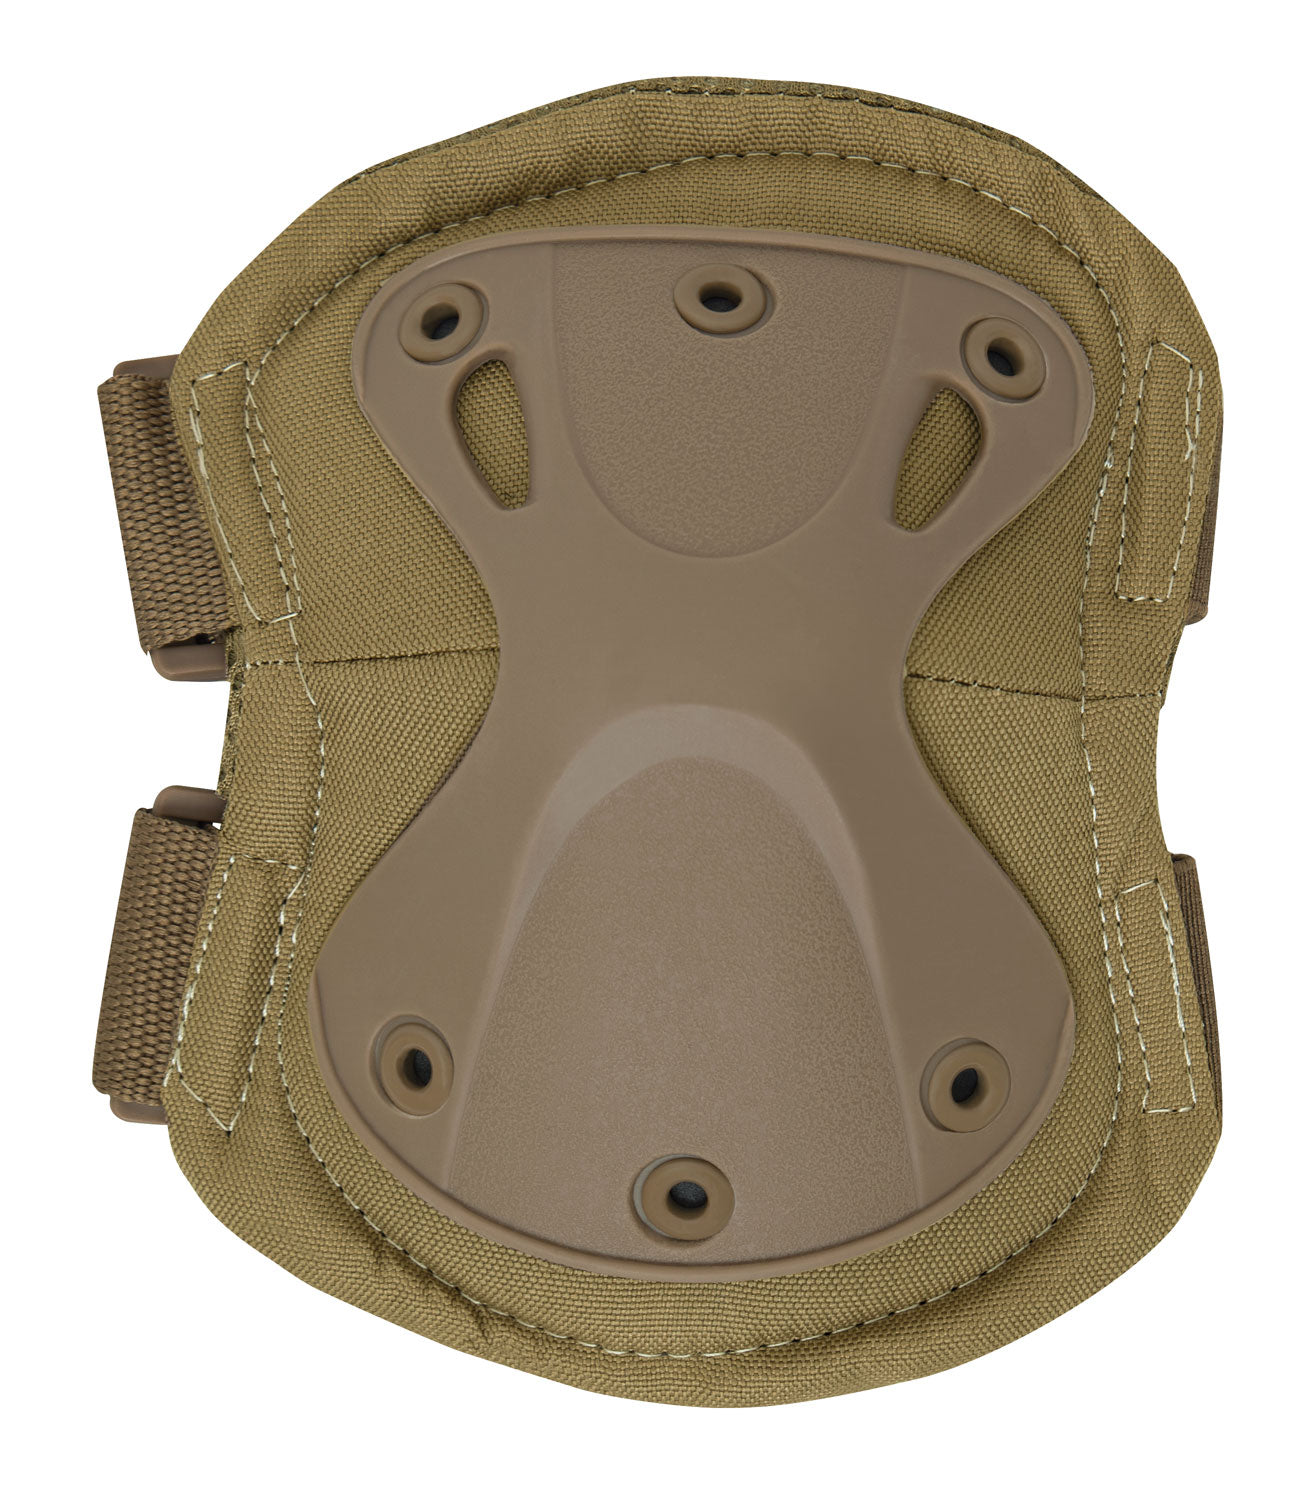 Low-Profile Tactical Elbow Pads